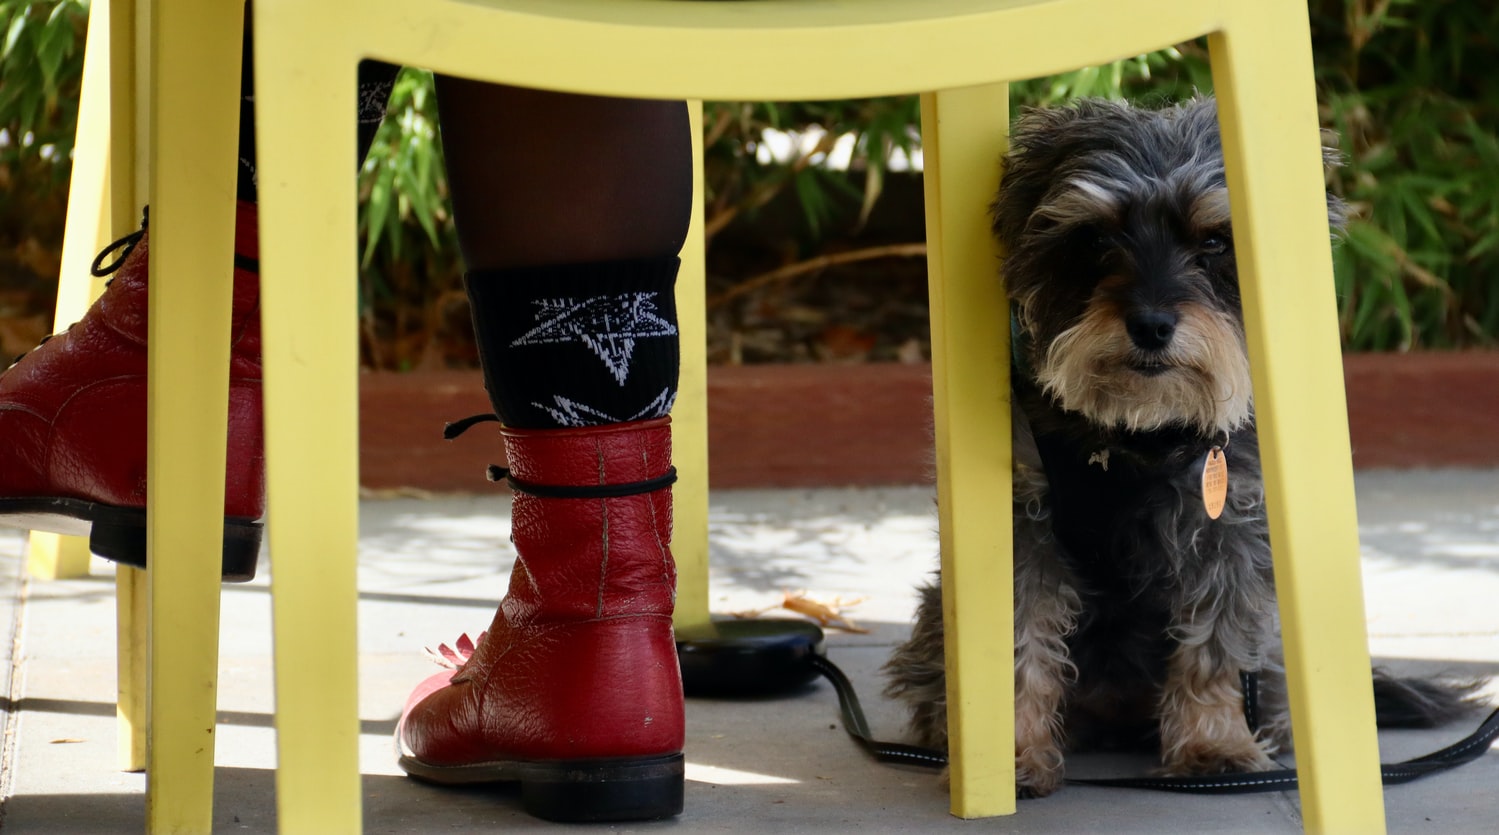 How To Get A Dog To Stop Peeing On A Patio